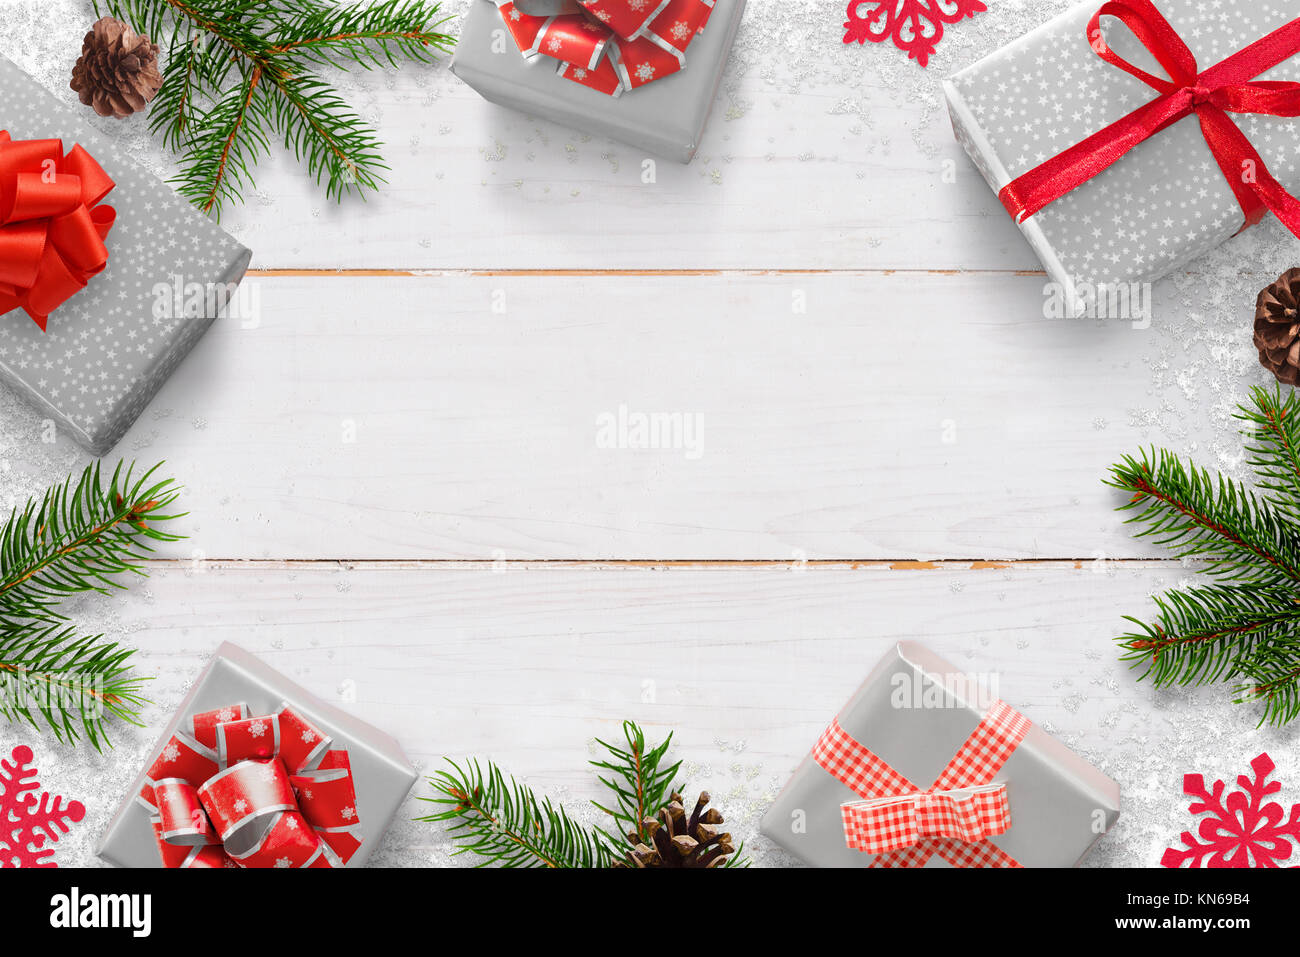 Christmas New Year background with gifts and free space for text. White wooden board with Christmas tree branches, pinecones, and snowflake decoration Stock Photo